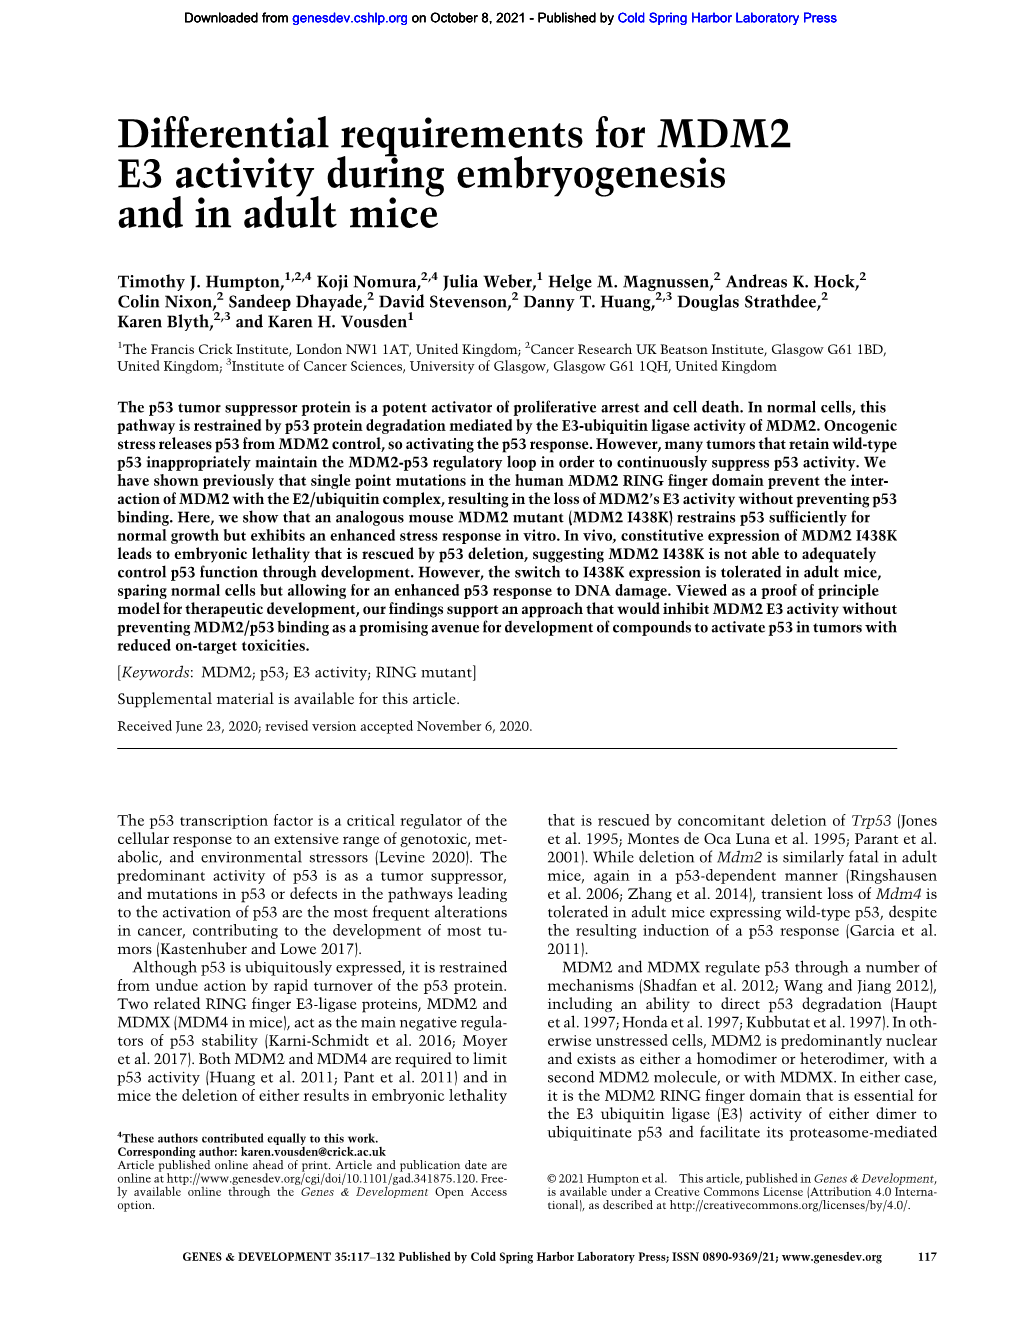 Differential Requirements for MDM2 E3 Activity During Embryogenesis and in Adult Mice